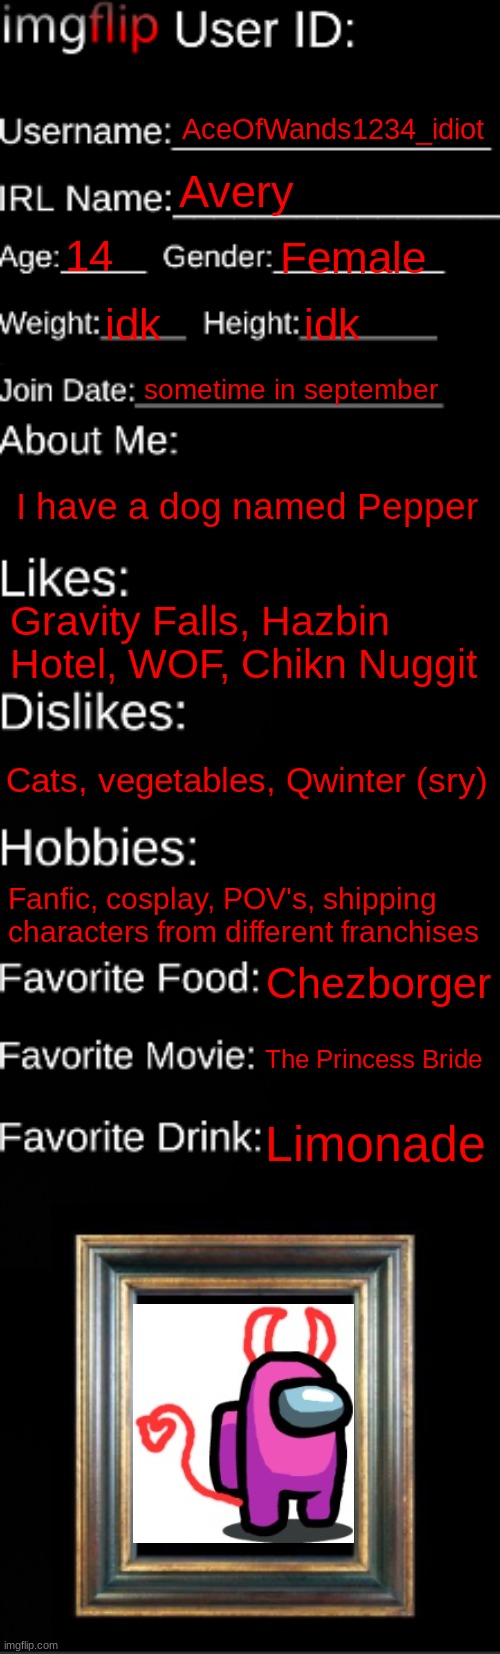 imgflip ID Card | AceOfWands1234_idiot; Avery; 14; Female; idk; idk; sometime in september; I have a dog named Pepper; Gravity Falls, Hazbin Hotel, WOF, Chikn Nuggit; Cats, vegetables, Qwinter (sry); Fanfic, cosplay, POV's, shipping characters from different franchises; Chezborger; The Princess Bride; Limonade | image tagged in imgflip id card | made w/ Imgflip meme maker